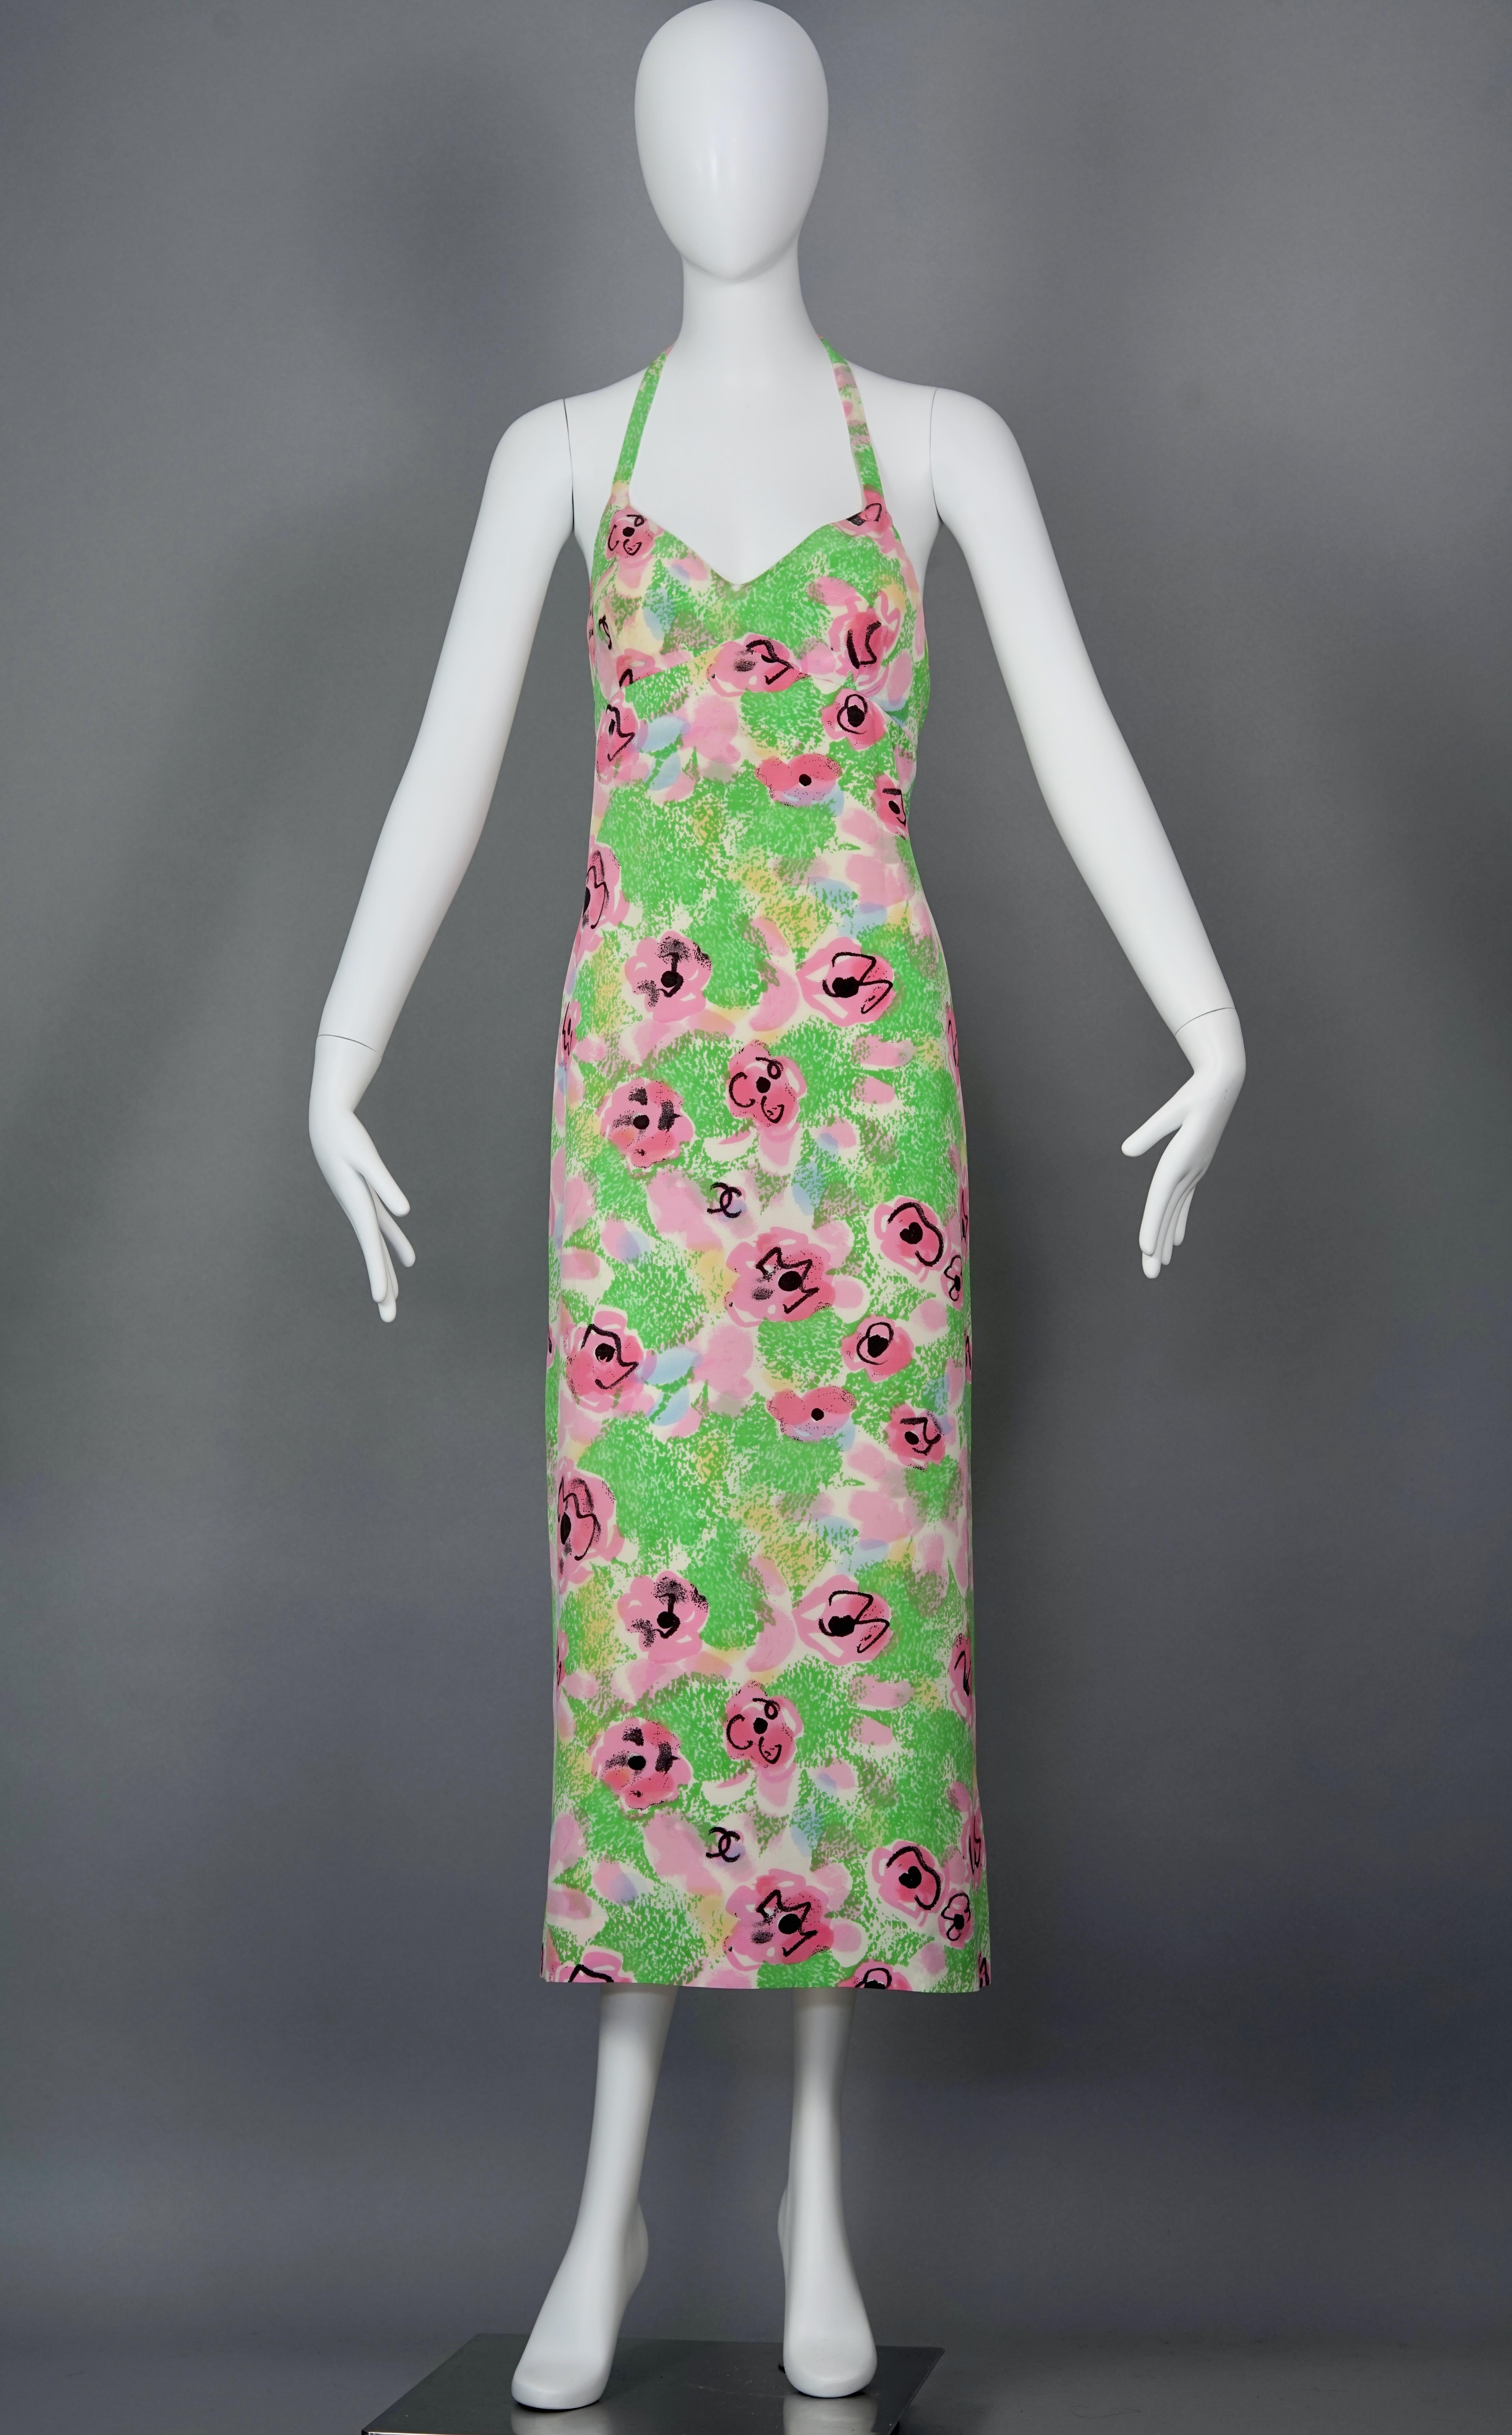 Vintage 1997 CHANEL BOUTIQUE Camellia Flower CC Logo Print Long Dress

From 1997 Spring Collection.

Measurements taken laid flat, please double bust, waist and hips:
Bust: FREE due to backless feature
Underbust: 15 inches (38 cm)
Waist: 18.90